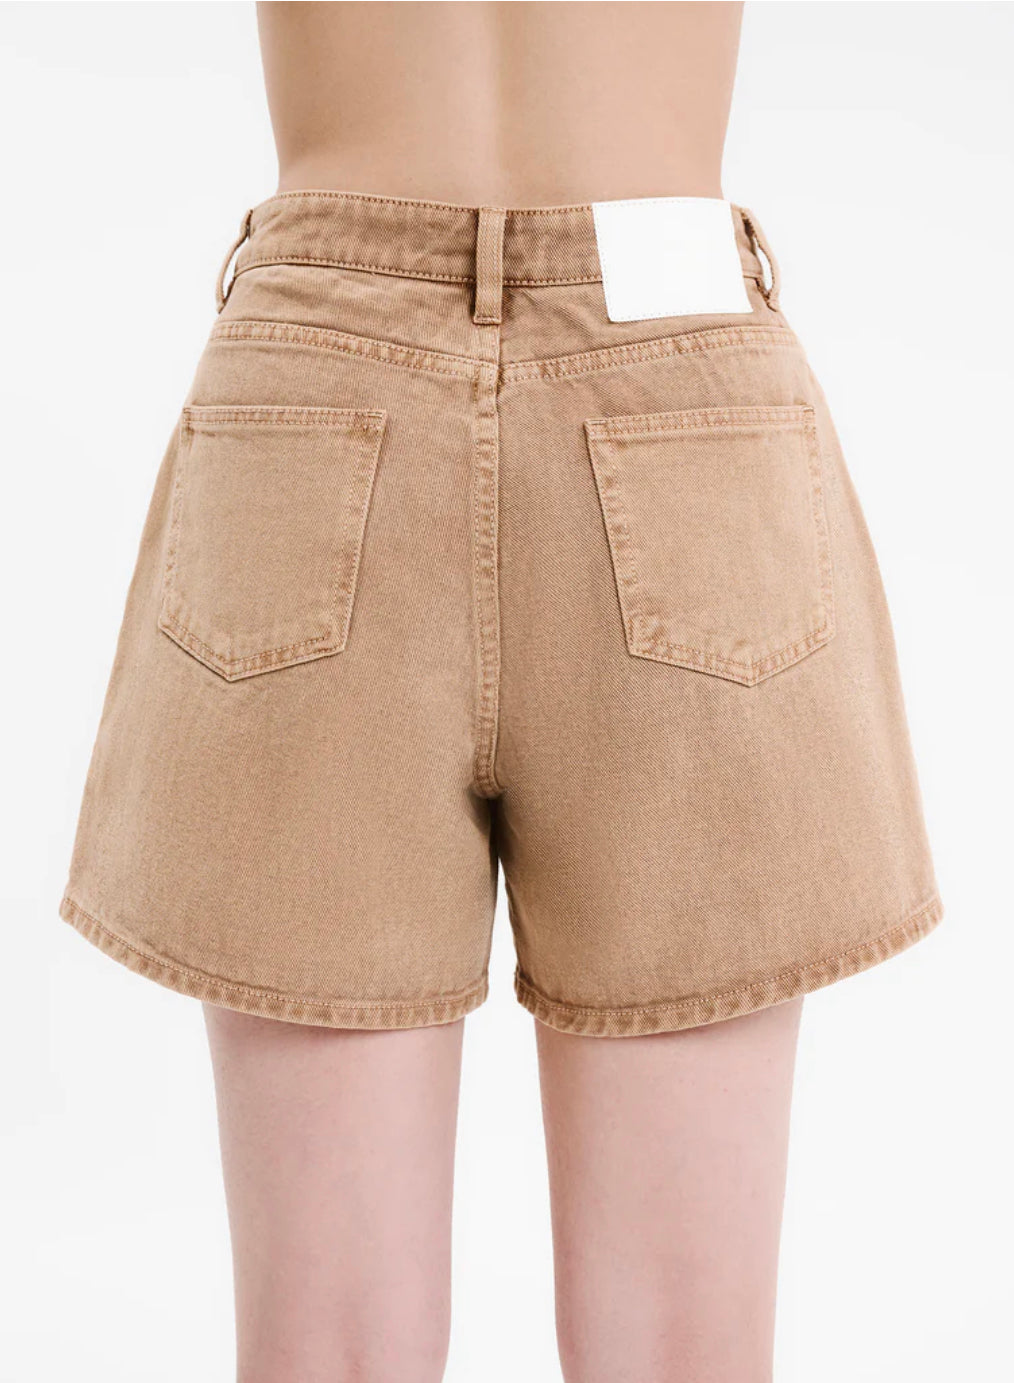 Nude Lucy The Blaise Short - Sesame